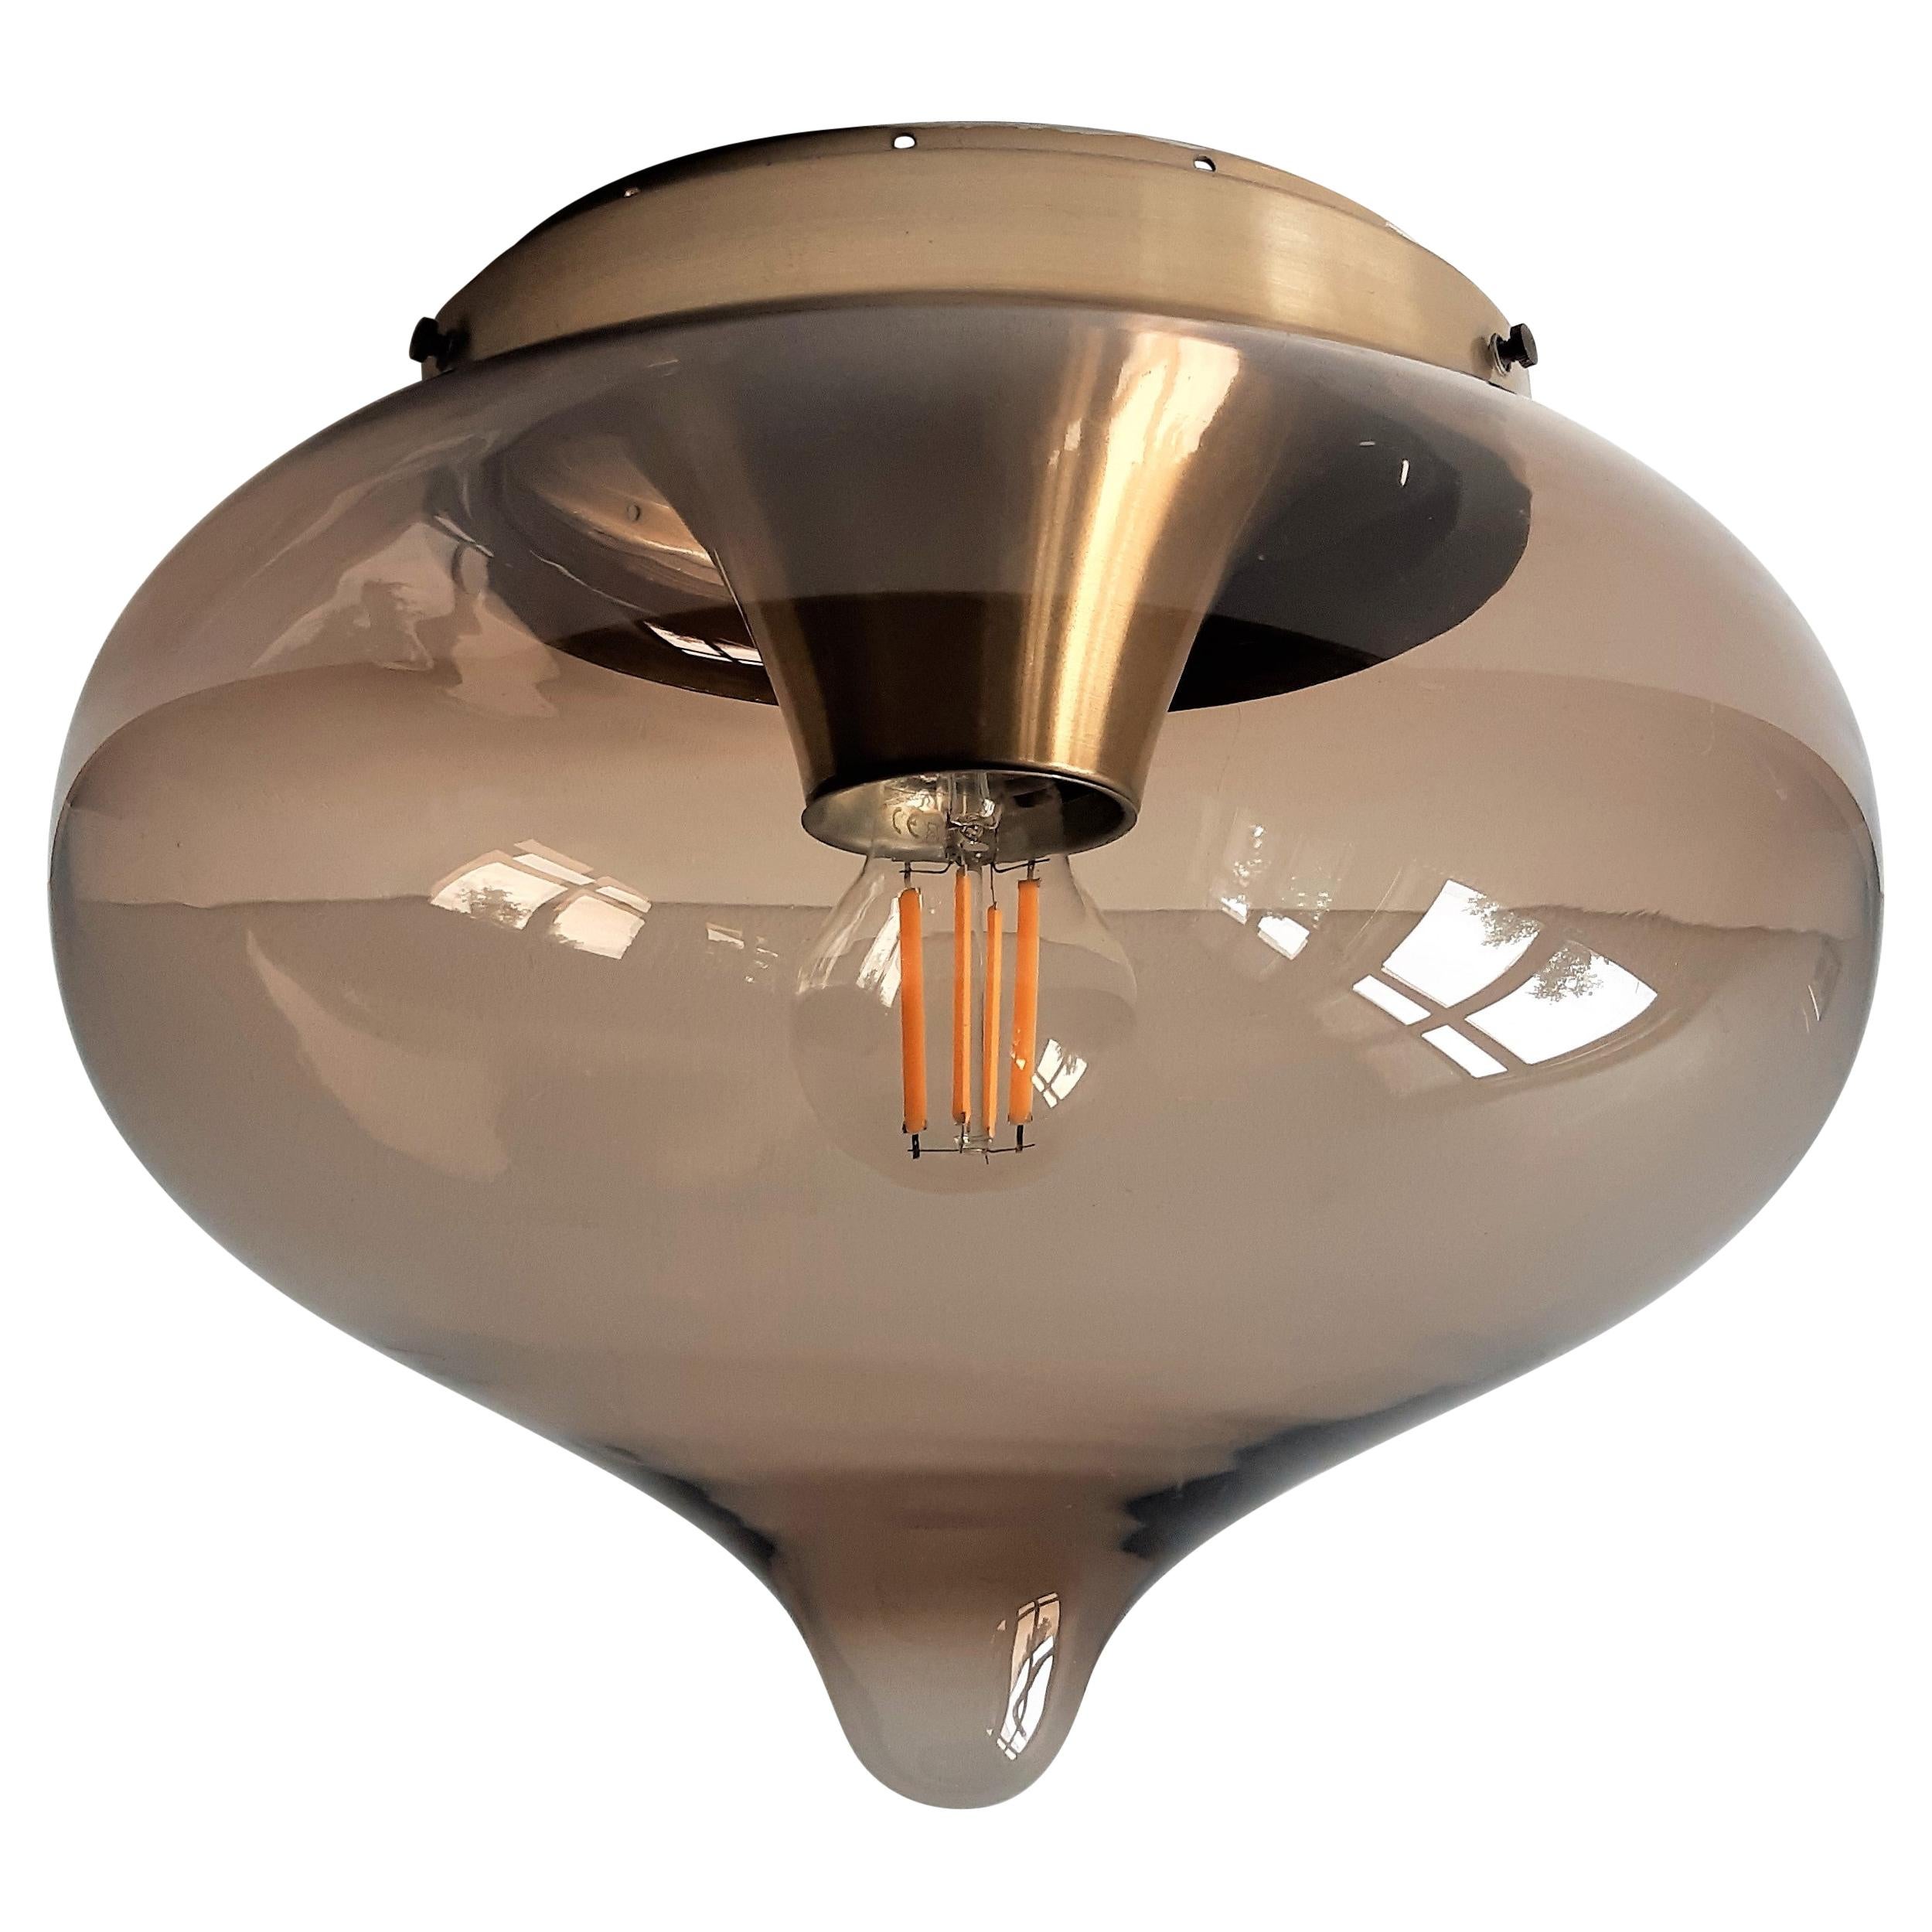 Droplet' Ceiling Lamp by Dijkstra Lighting, the Netherlands, 1960's/1970's  For Sale at 1stDibs